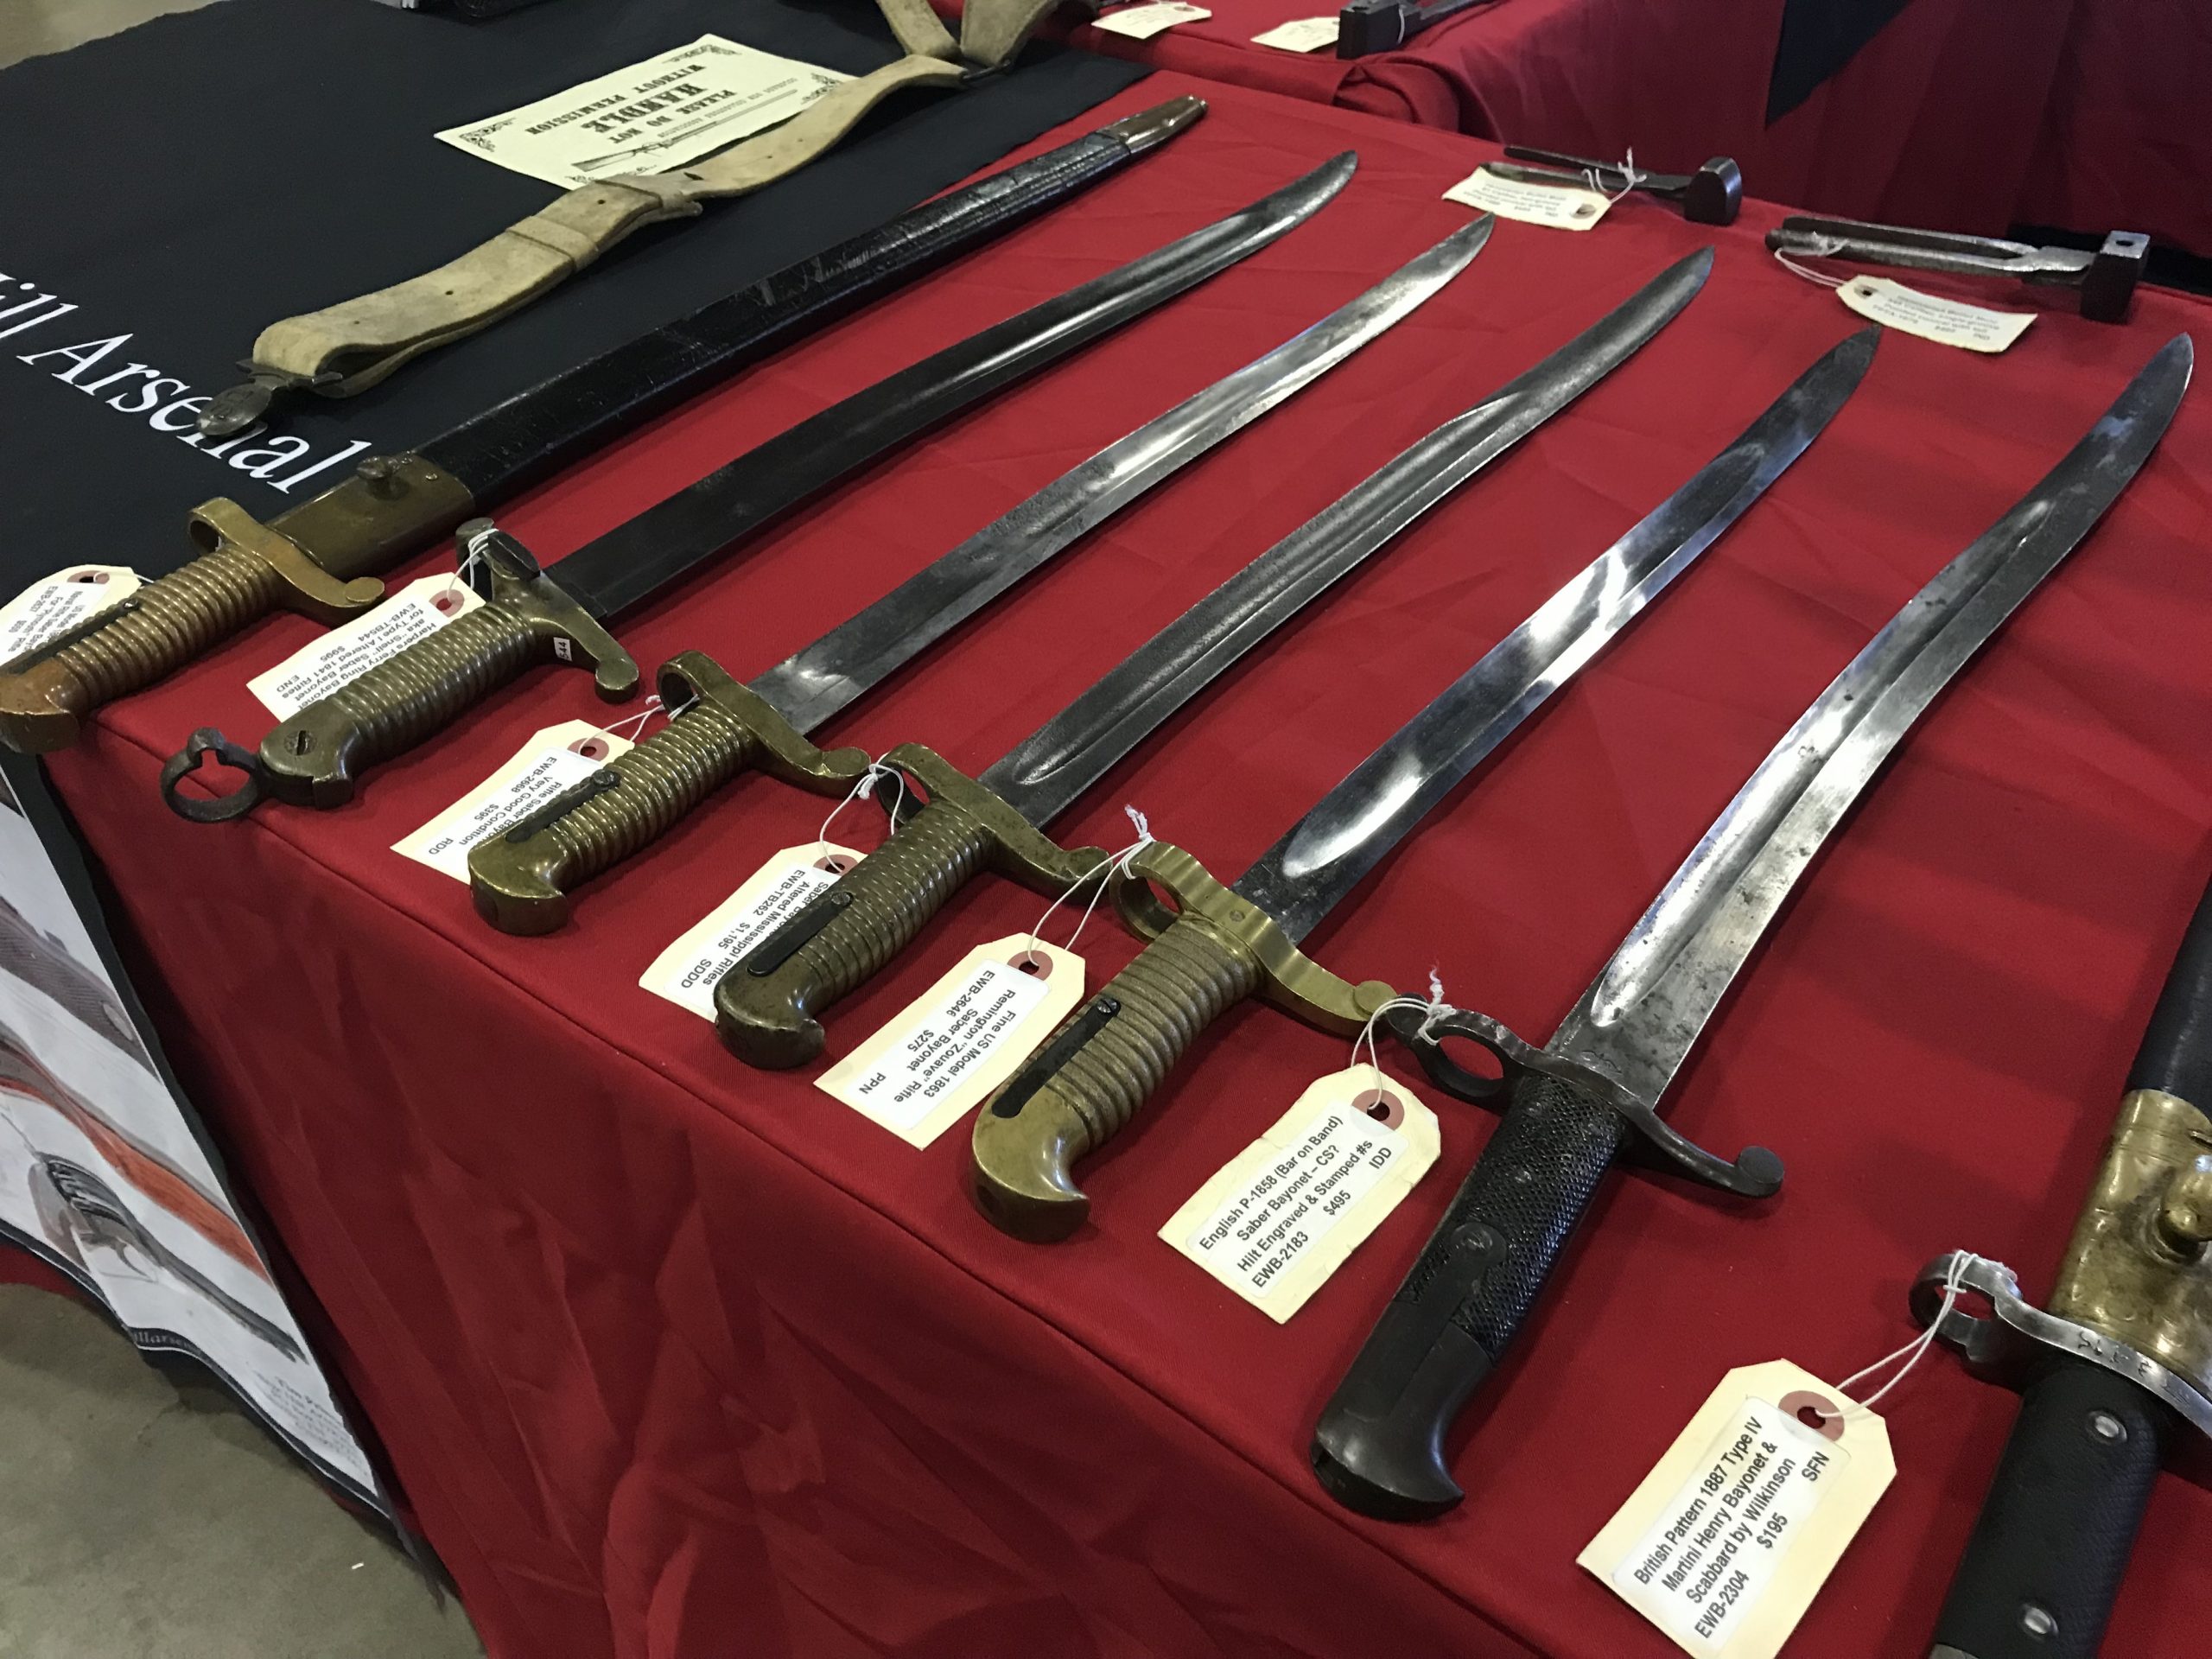 Like any good gun show, knife collectors have their niche that they like to collect--and sell.